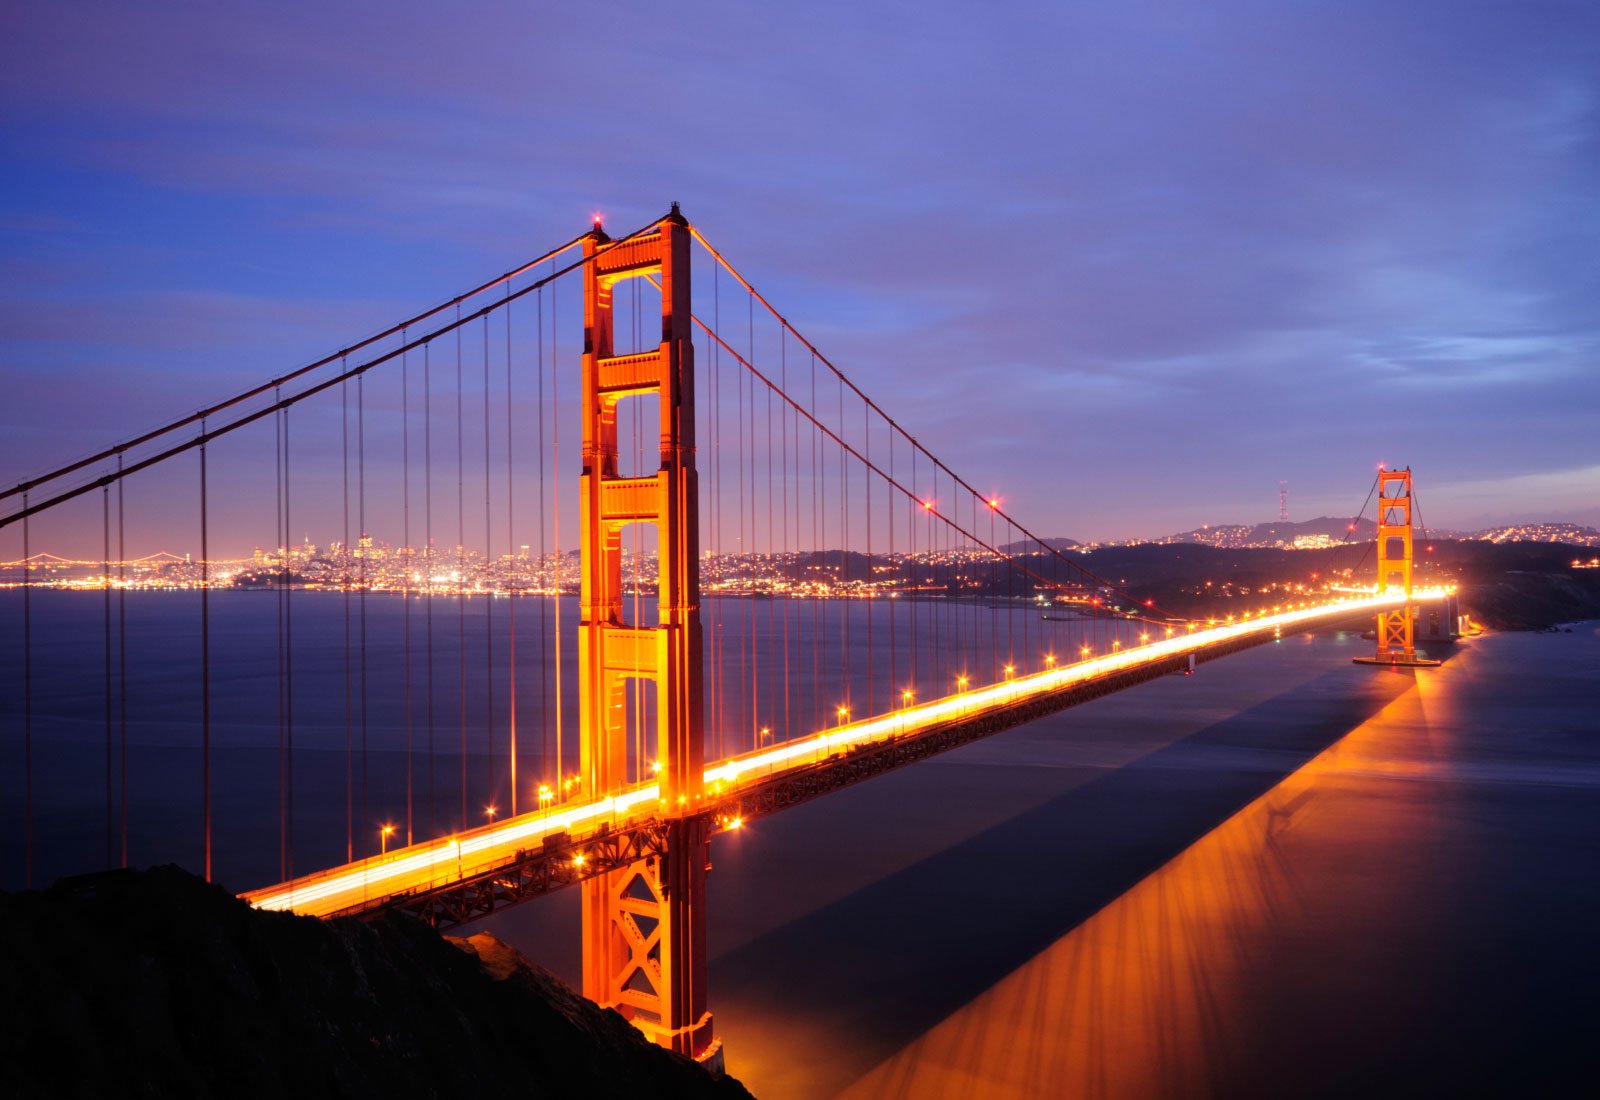 Attractions of San Francisco